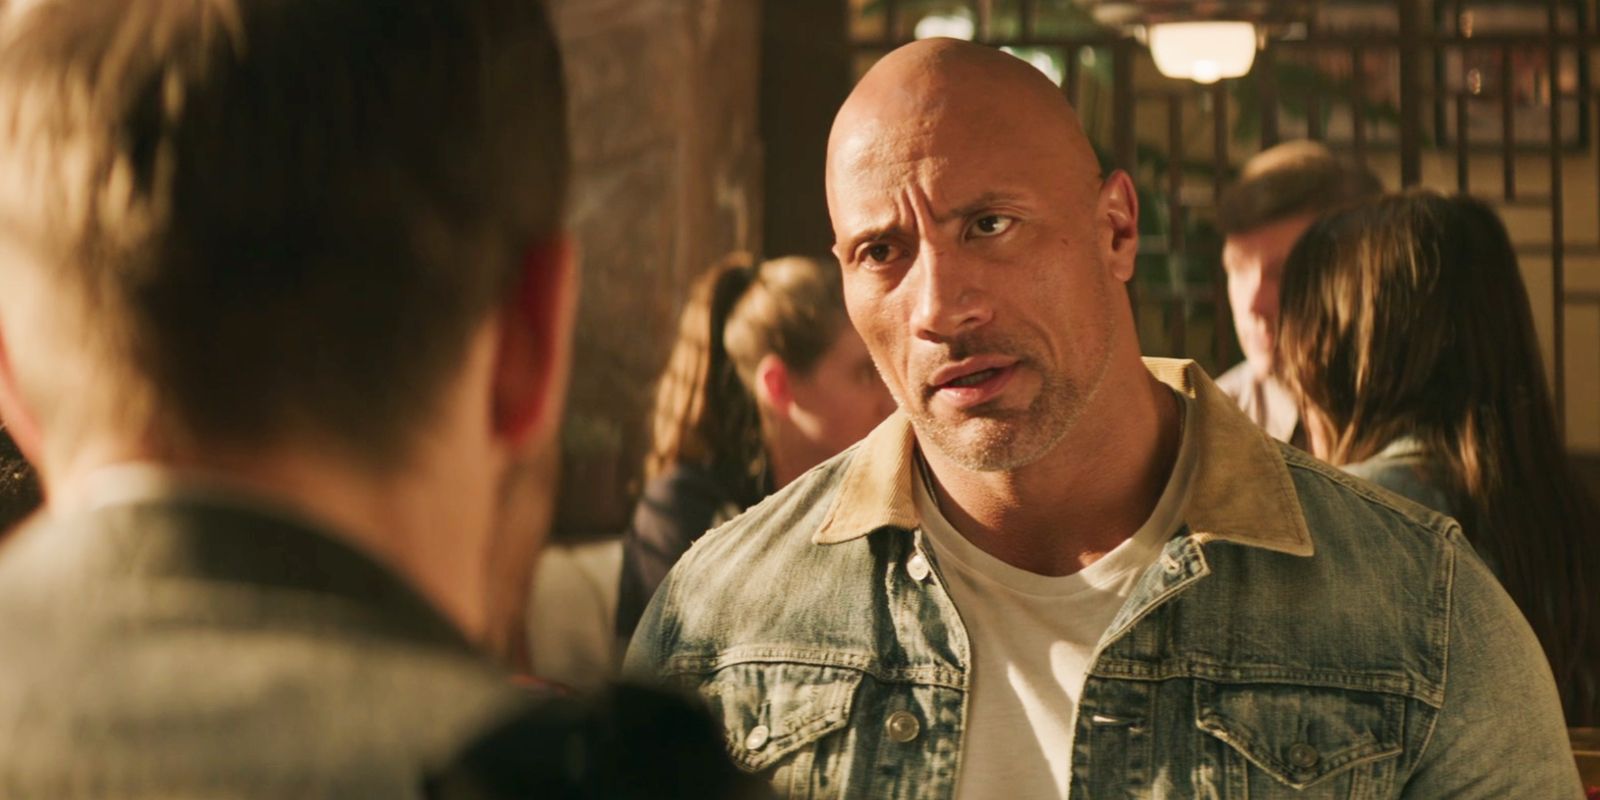 Dwayne Johnson as Luke Hobbs with a concerned look on his face in Hobbs & Shaw